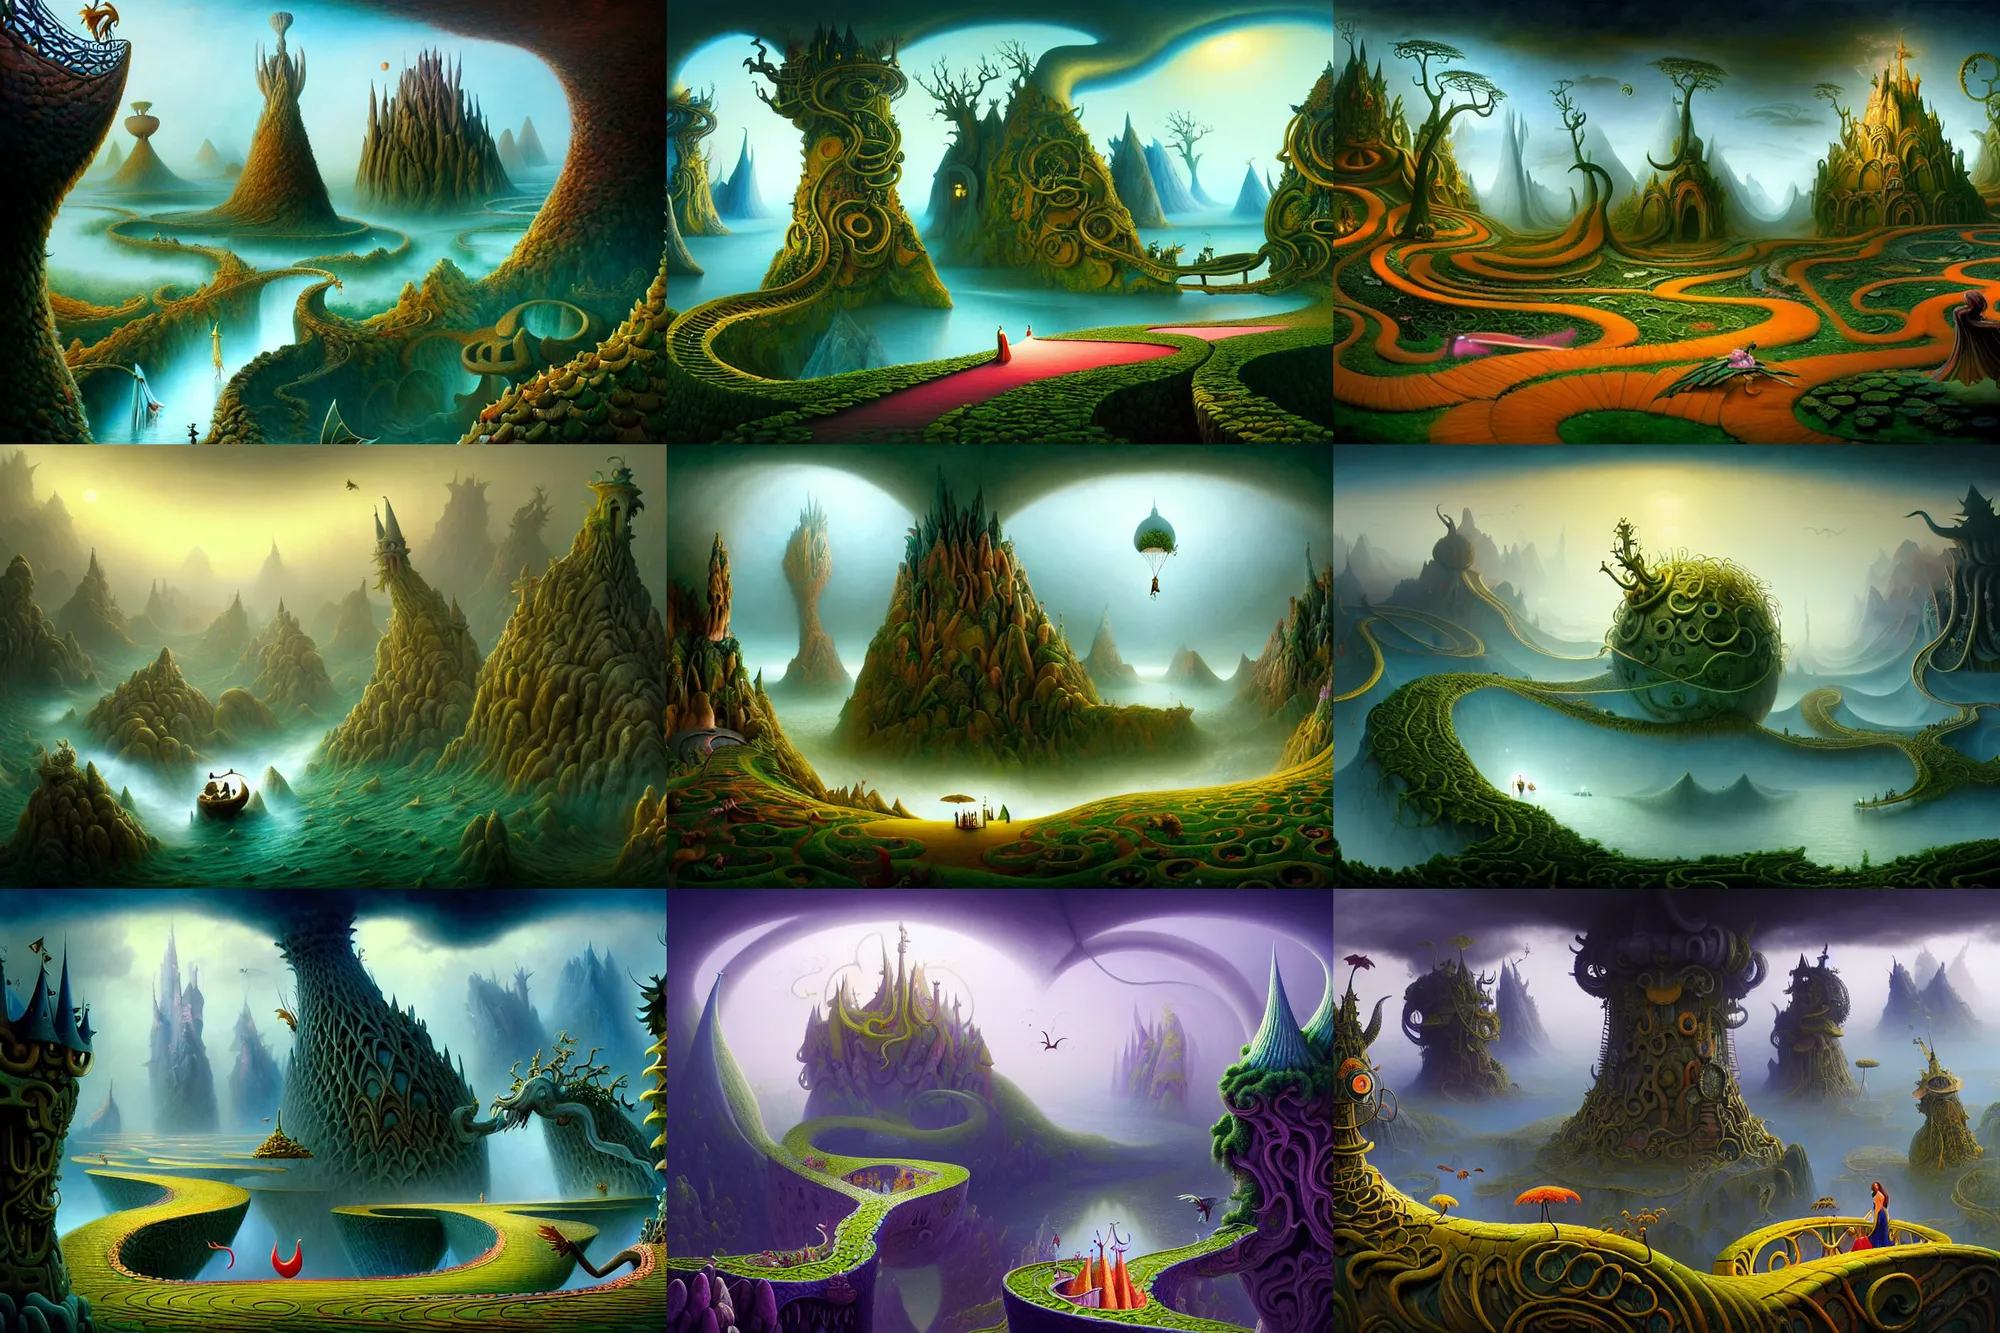 Prompt: a beguiling epic stunning beautiful and insanely detailed matte painting of the impossible winding path in a dream world with surreal architecture designed by Heironymous Bosch, dream world populated with mythical whimsical creatures, mega structures inspired by Heironymous Bosch's Garden of Earthly Delights, vast surreal landscape and horizon by Cyril Rolando and Noah Bradley and Mike Azevedo, masterpiece!!!, grand!, imaginative!!!, whimsical!!, epic scale, intricate details, sense of awe, elite, wonder, insanely complex, masterful composition!!!, sharp focus, fantasy realism, dramatic lighting